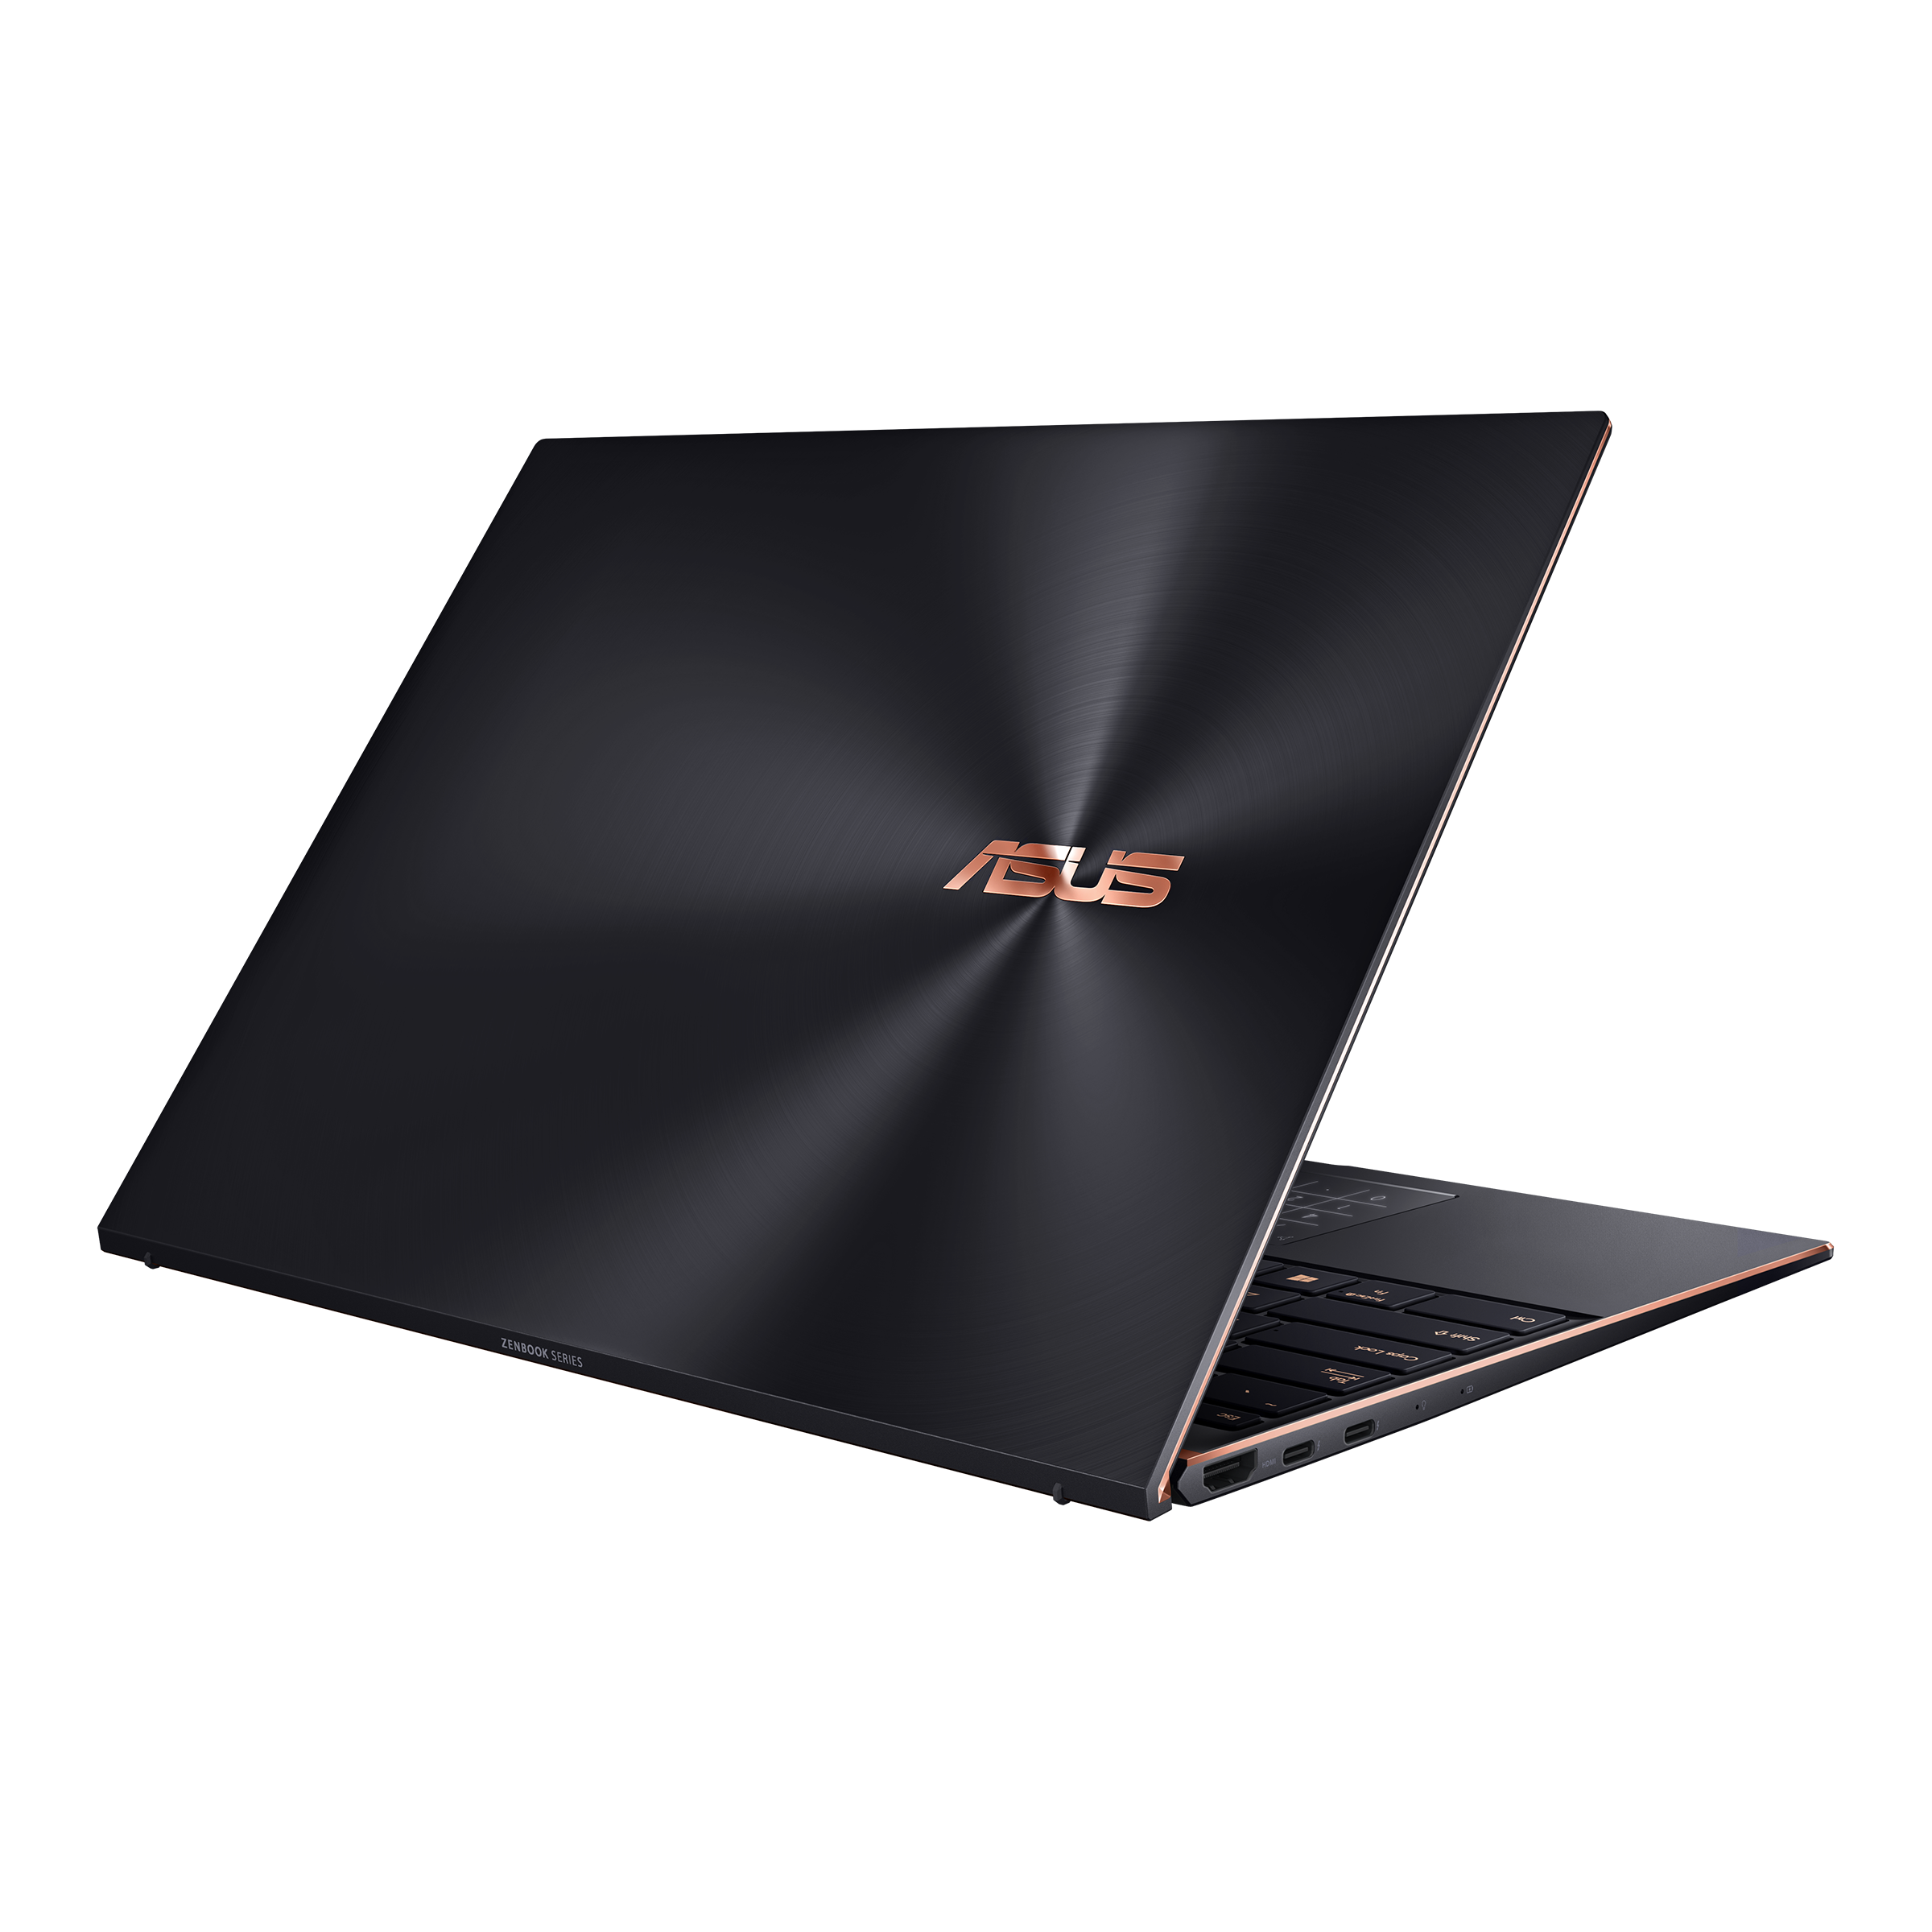 fair carve Involved Zenbook S UX393 (11th Gen Intel)｜Laptops For Home｜ASUS USA